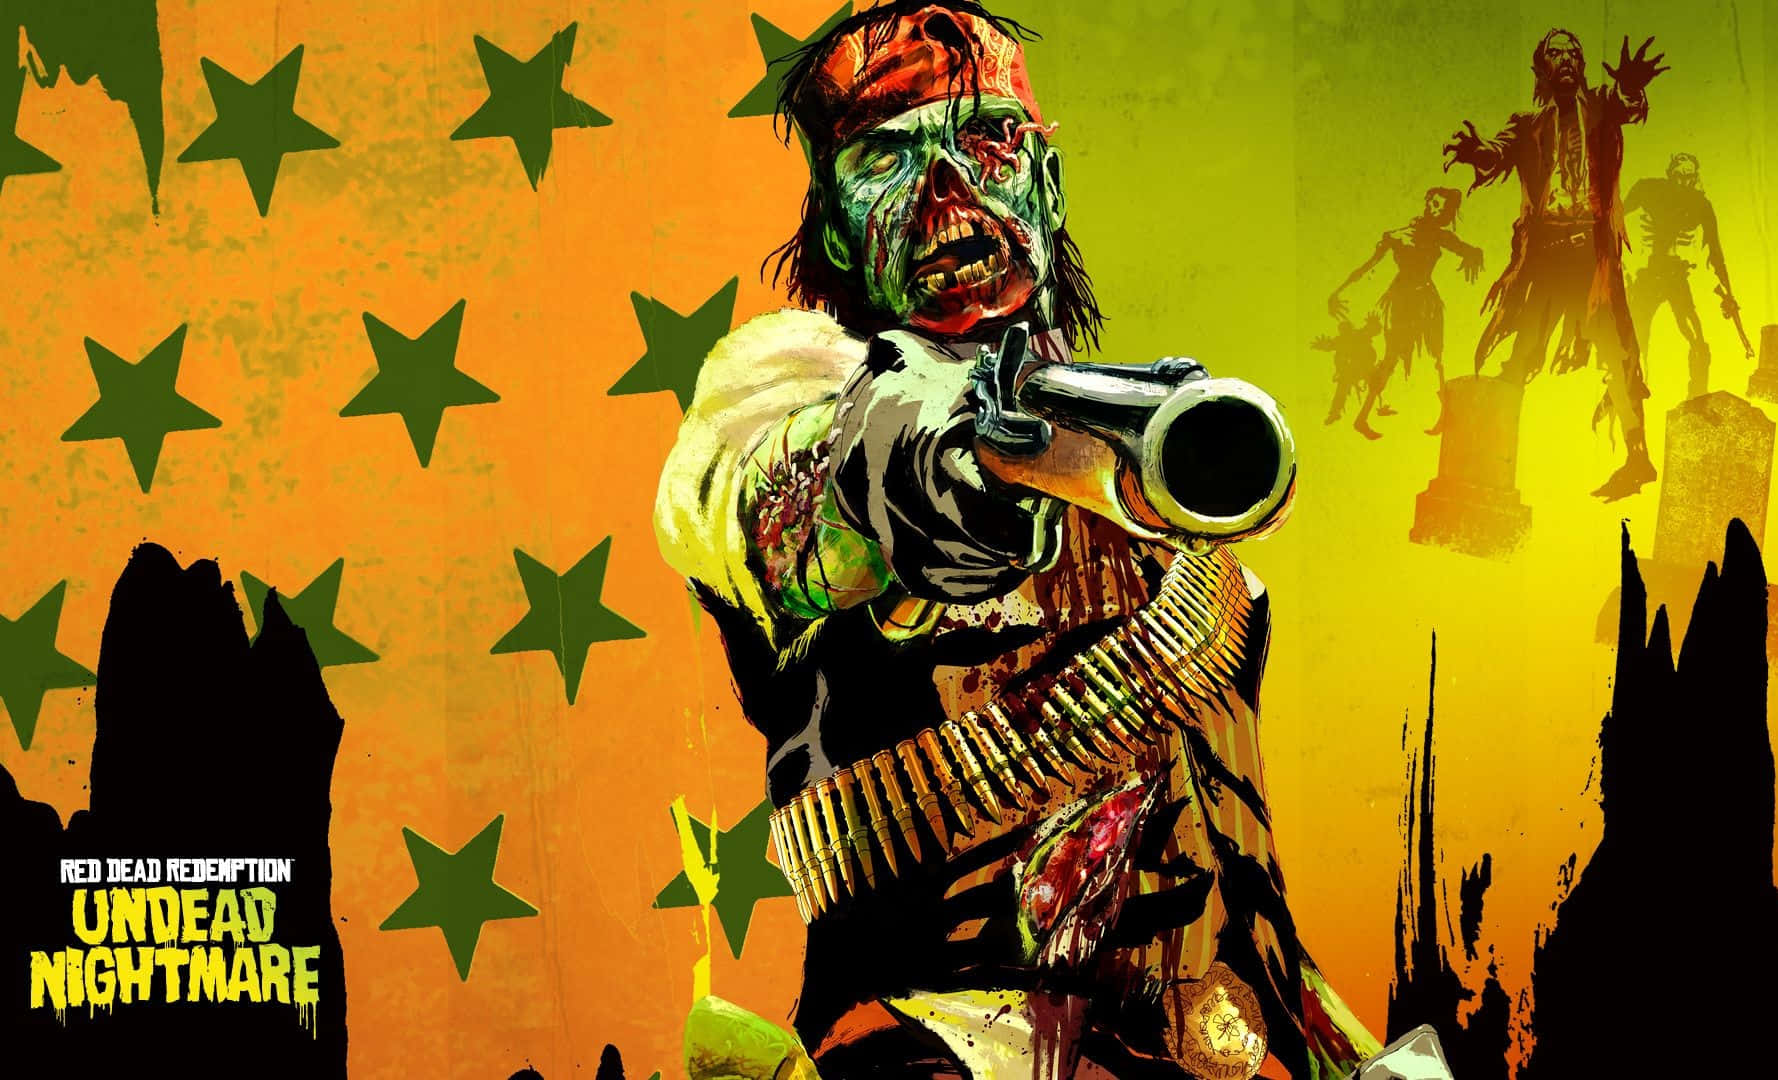 Gang Violence, Horse Thievery, and Crime Spree in Red Dead Redemption Wallpaper